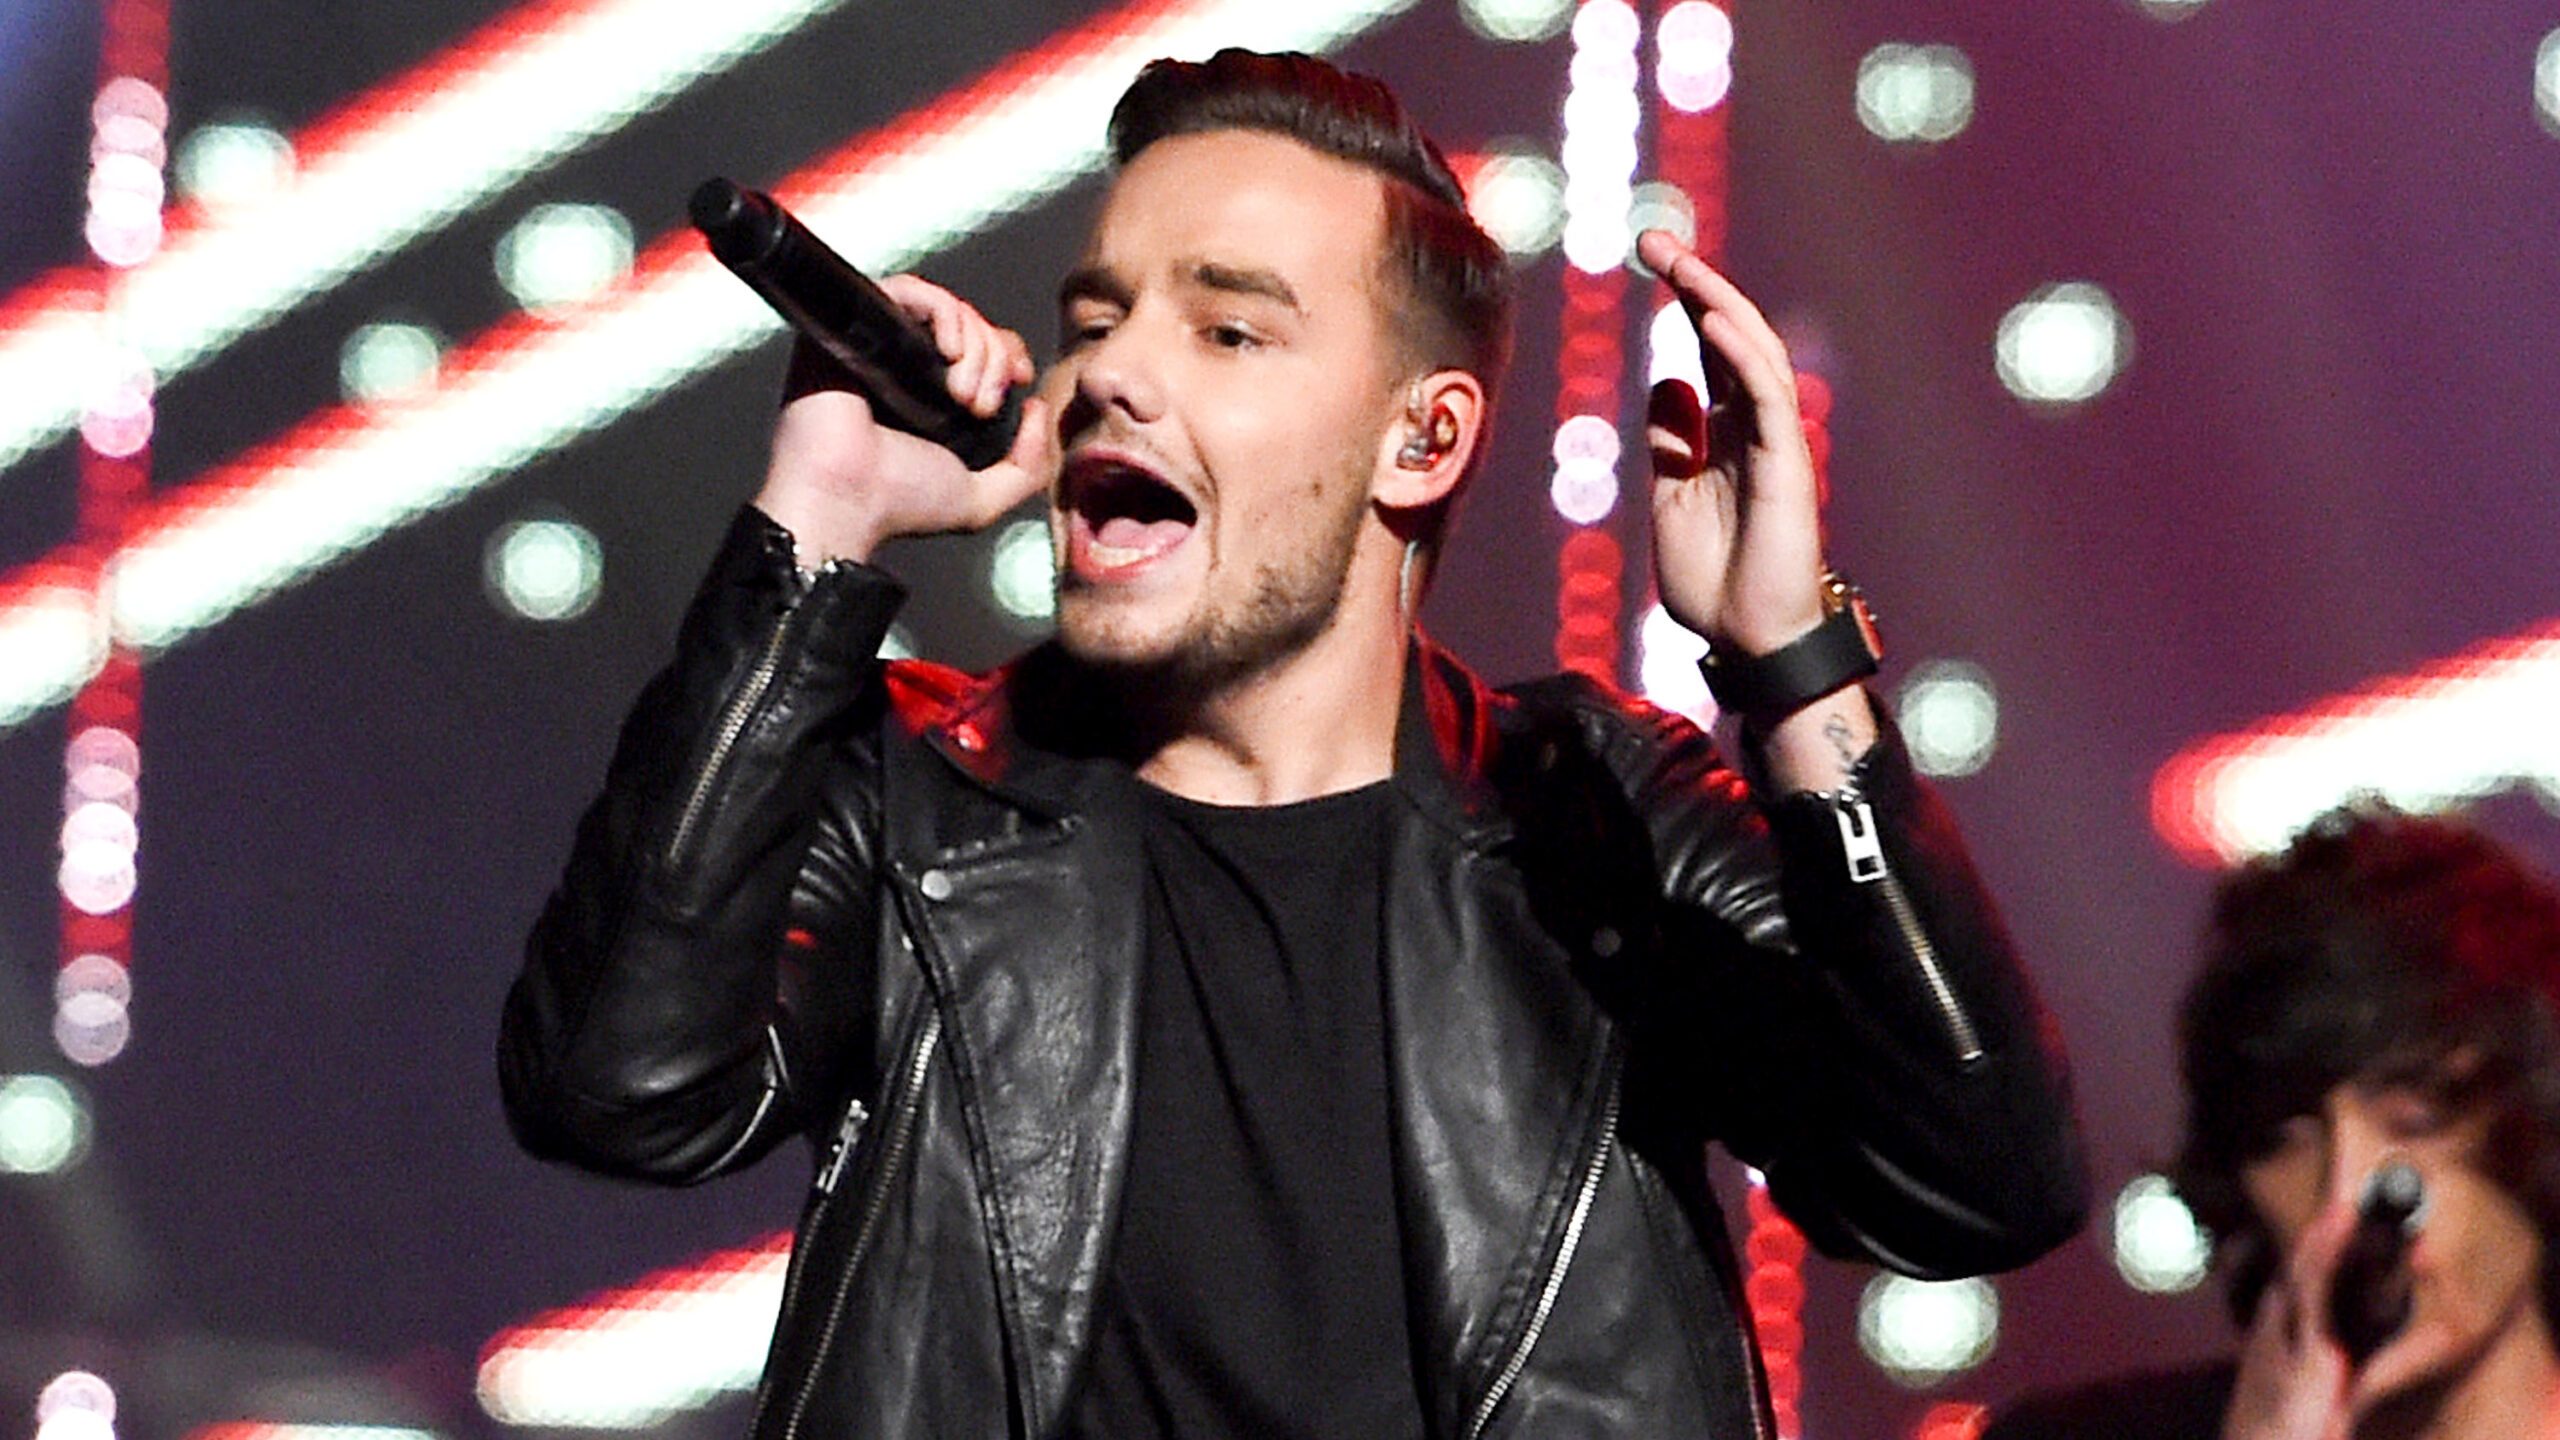 Liam Payne latest from One Direction to go solo